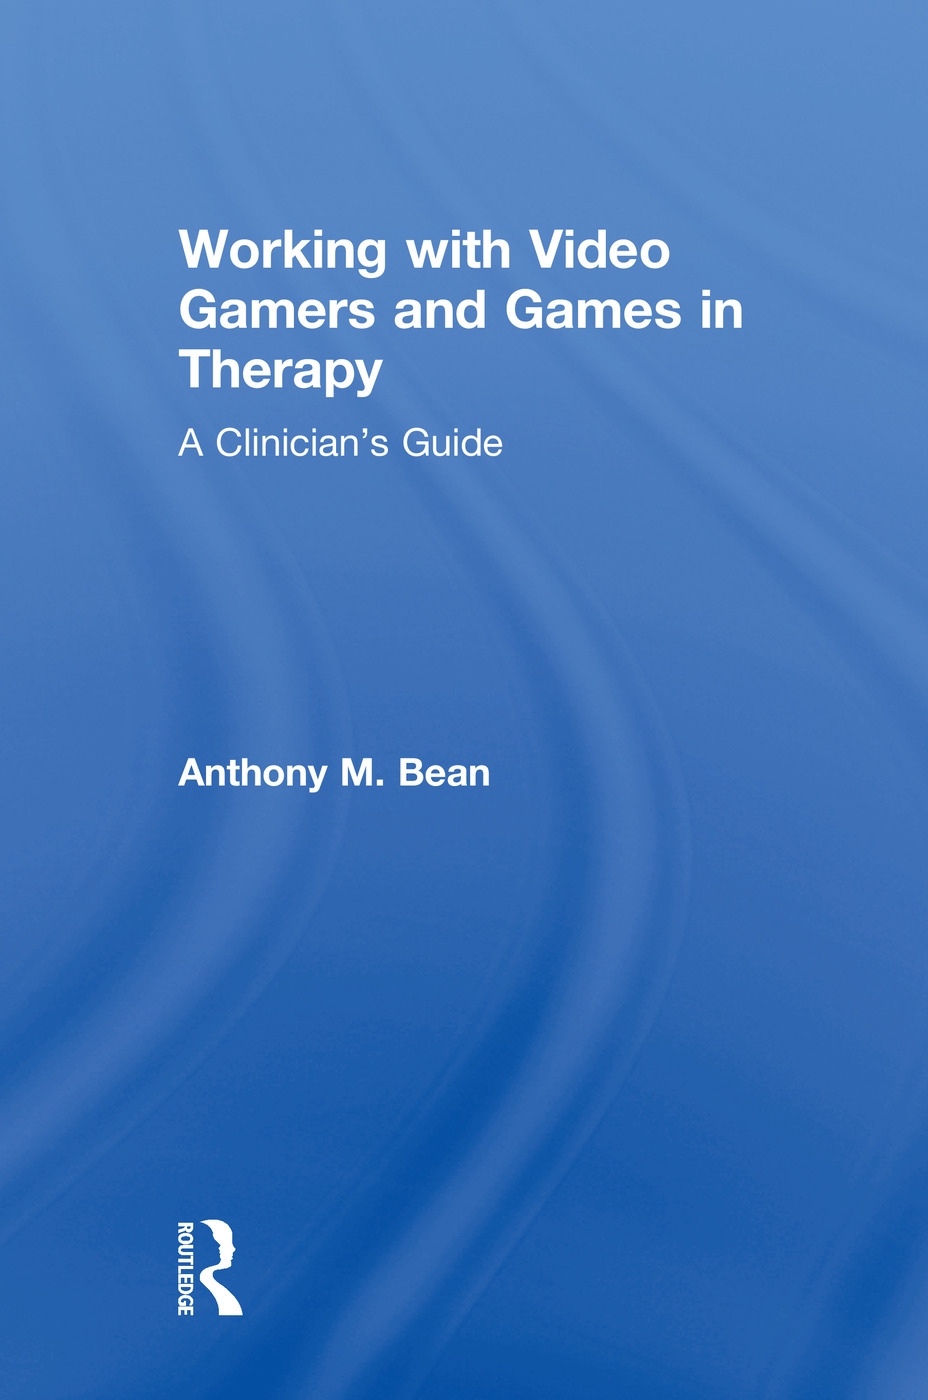 Working with Video Gamers and Games in Therapy: A Clinician’s Guide